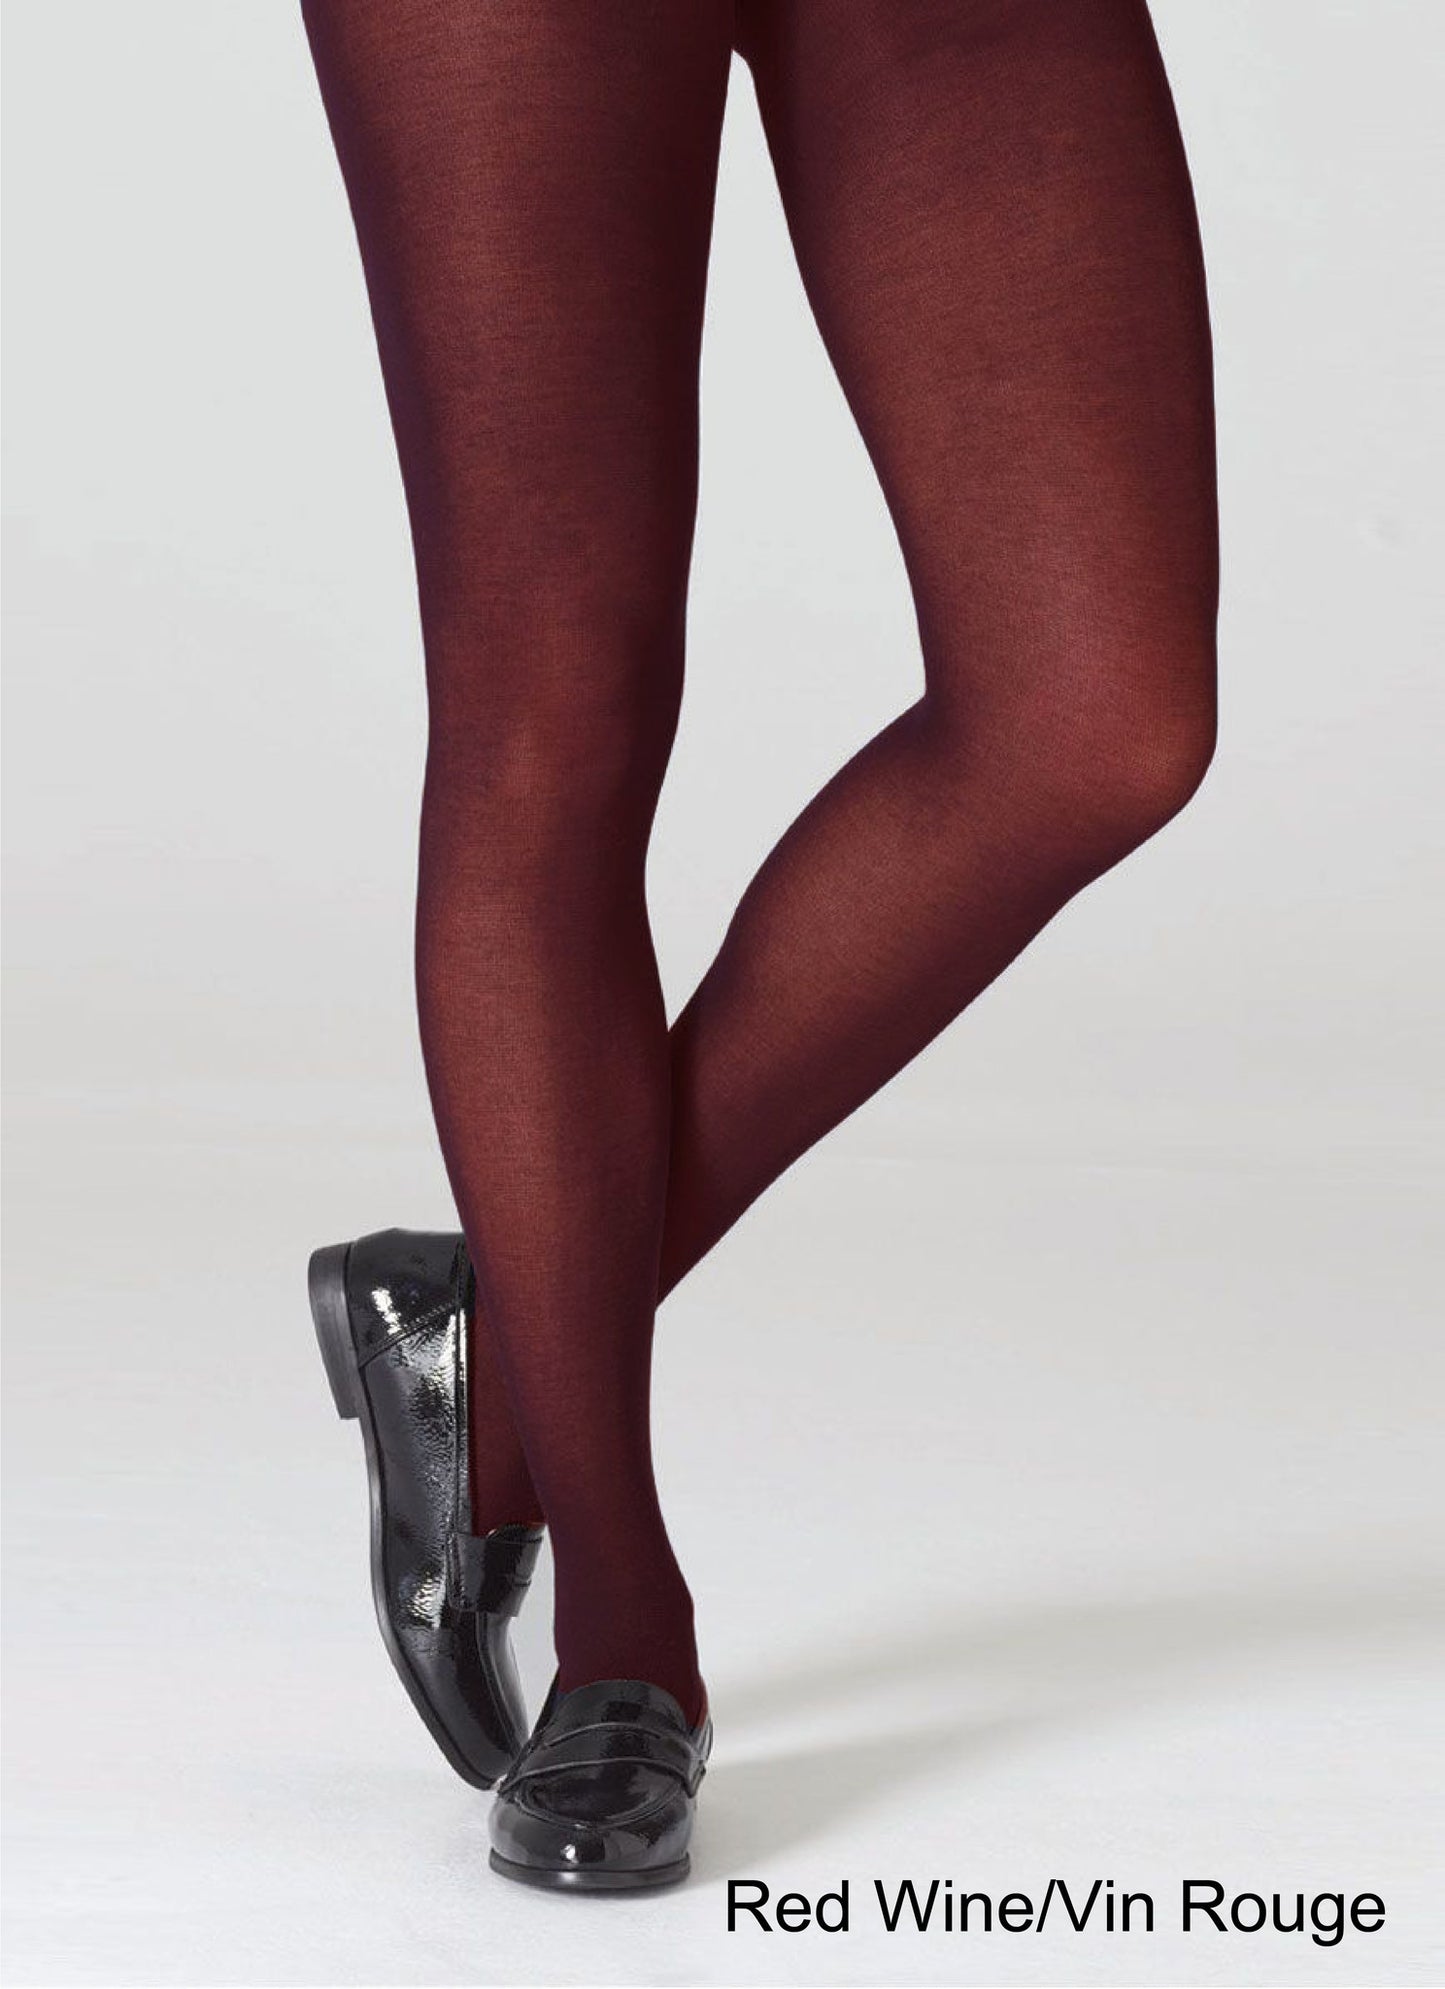 Burgundy Opaque Tights